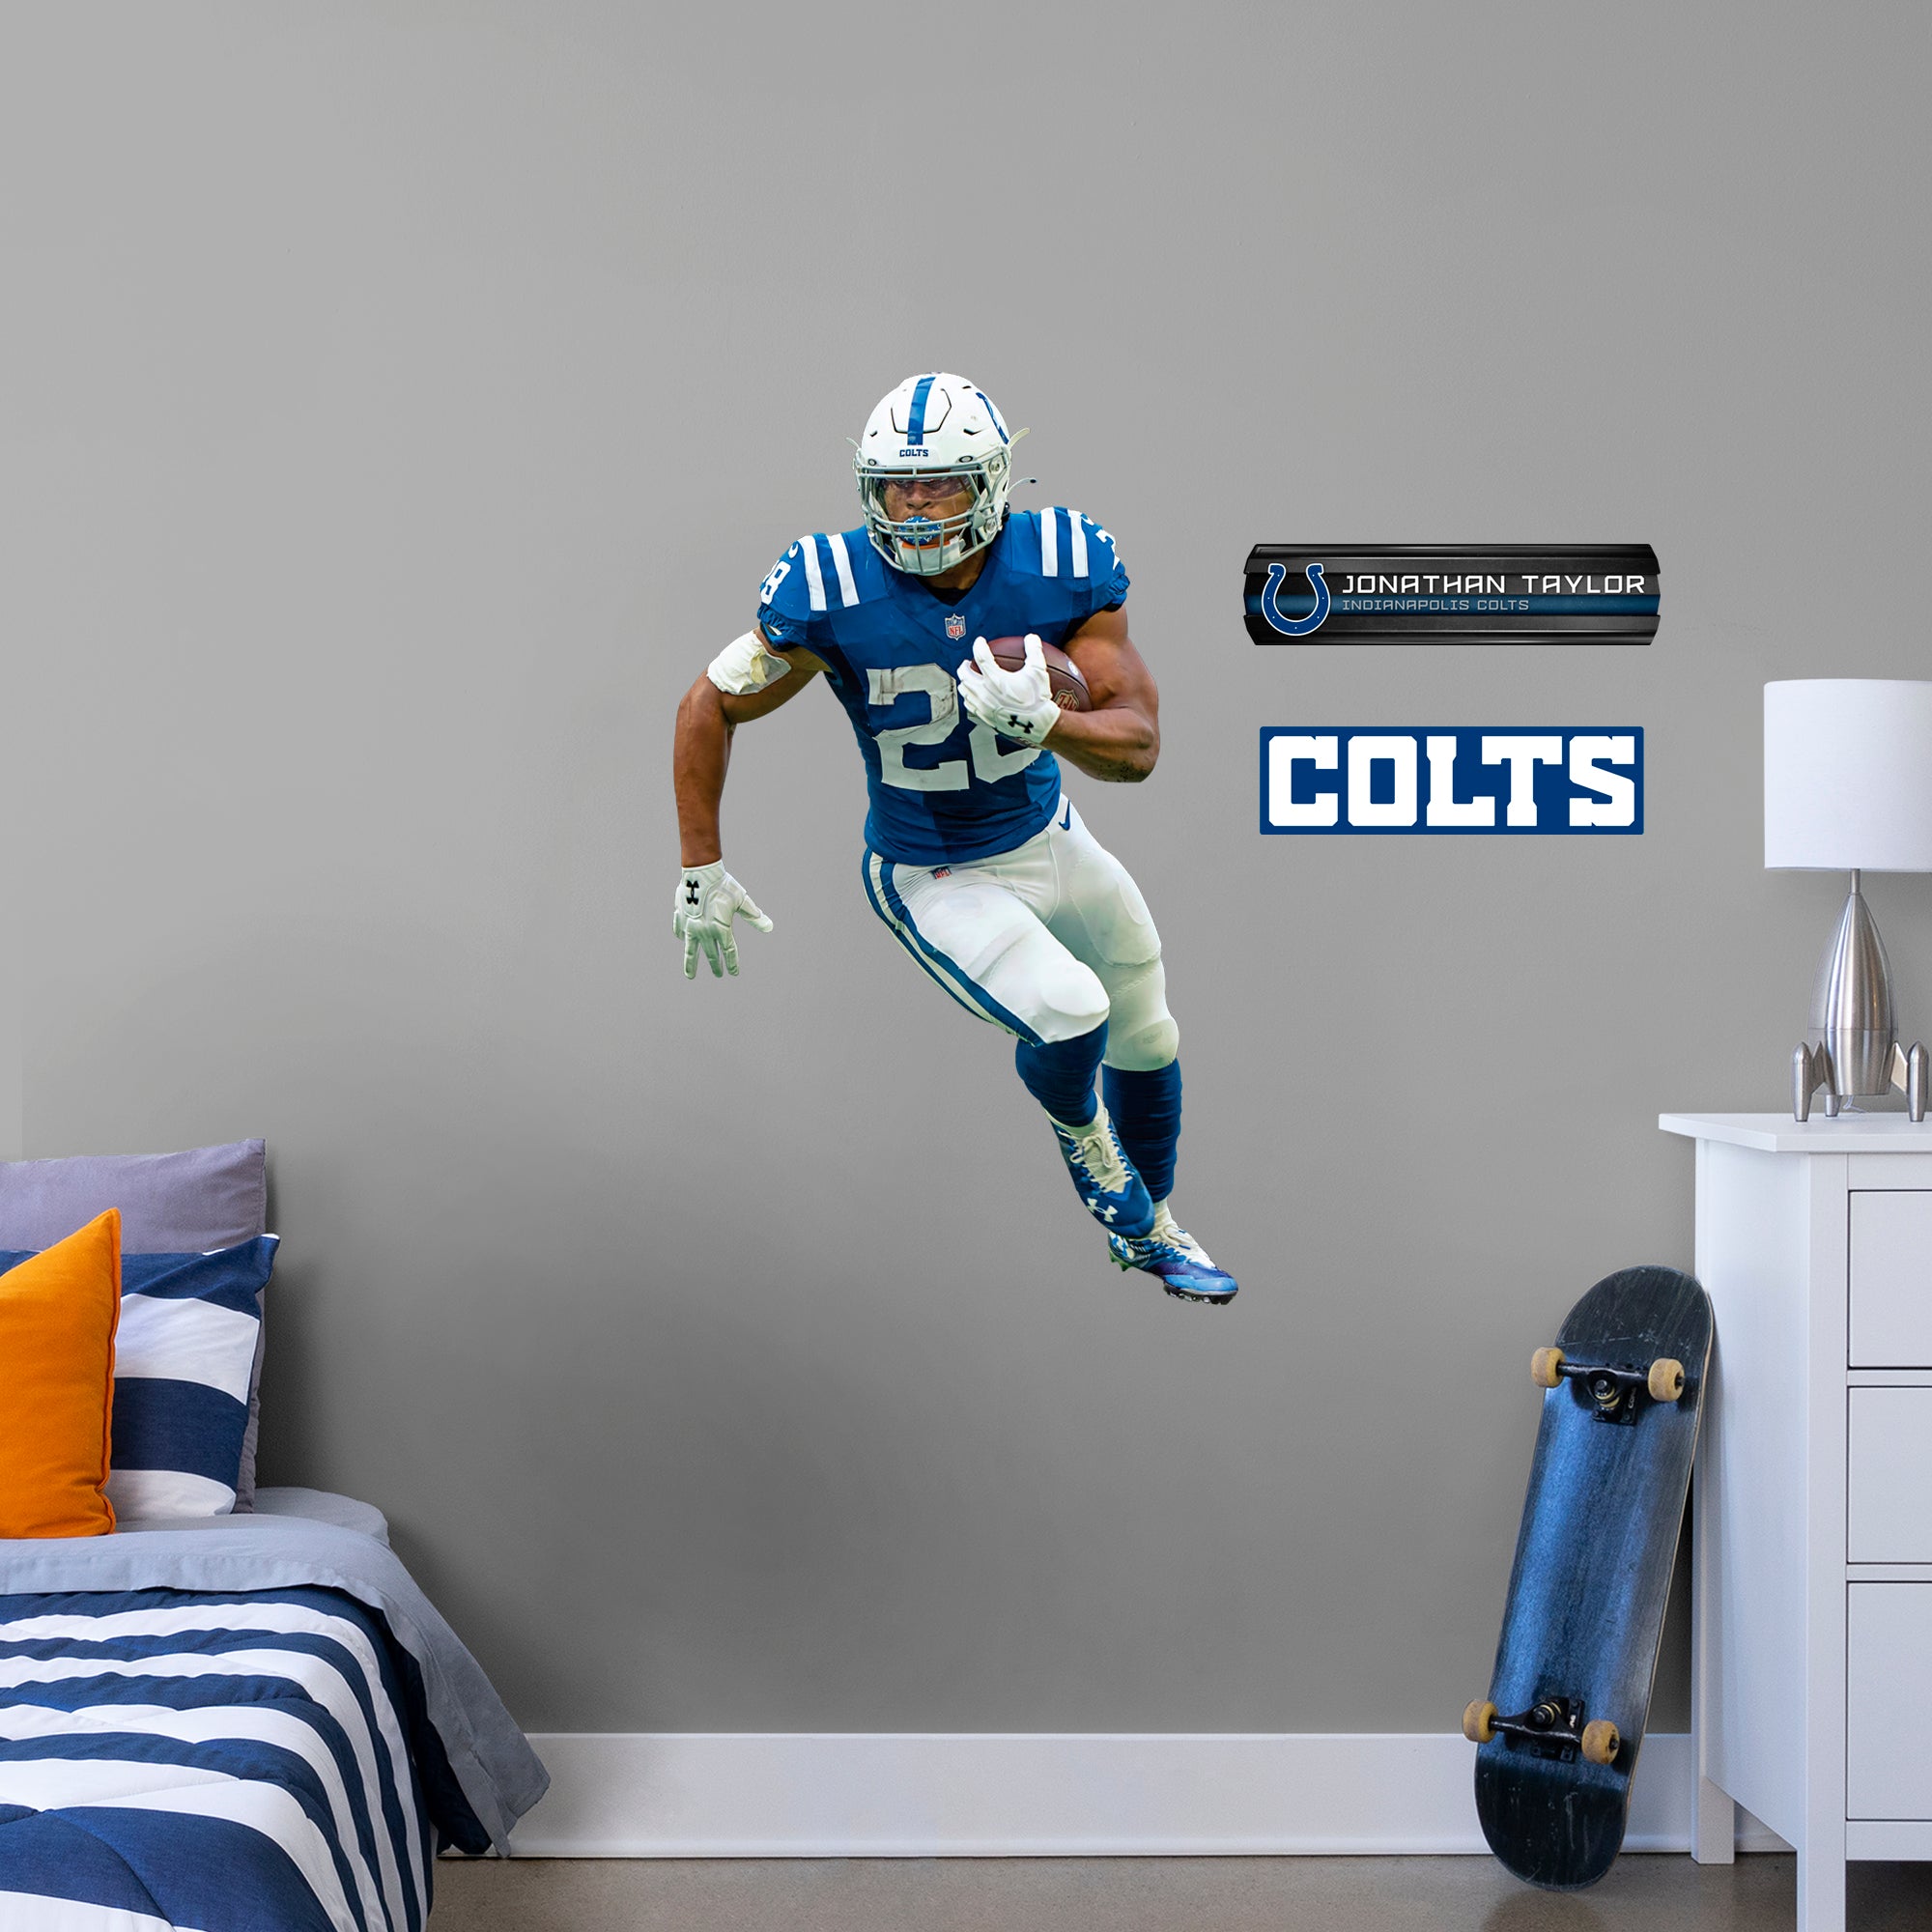 Jonathan Taylor for Indianapolis Colts: Real Big - Officially Licensed NFL Removable Wall Decal Giant Athlete + 2 Decals by Fath